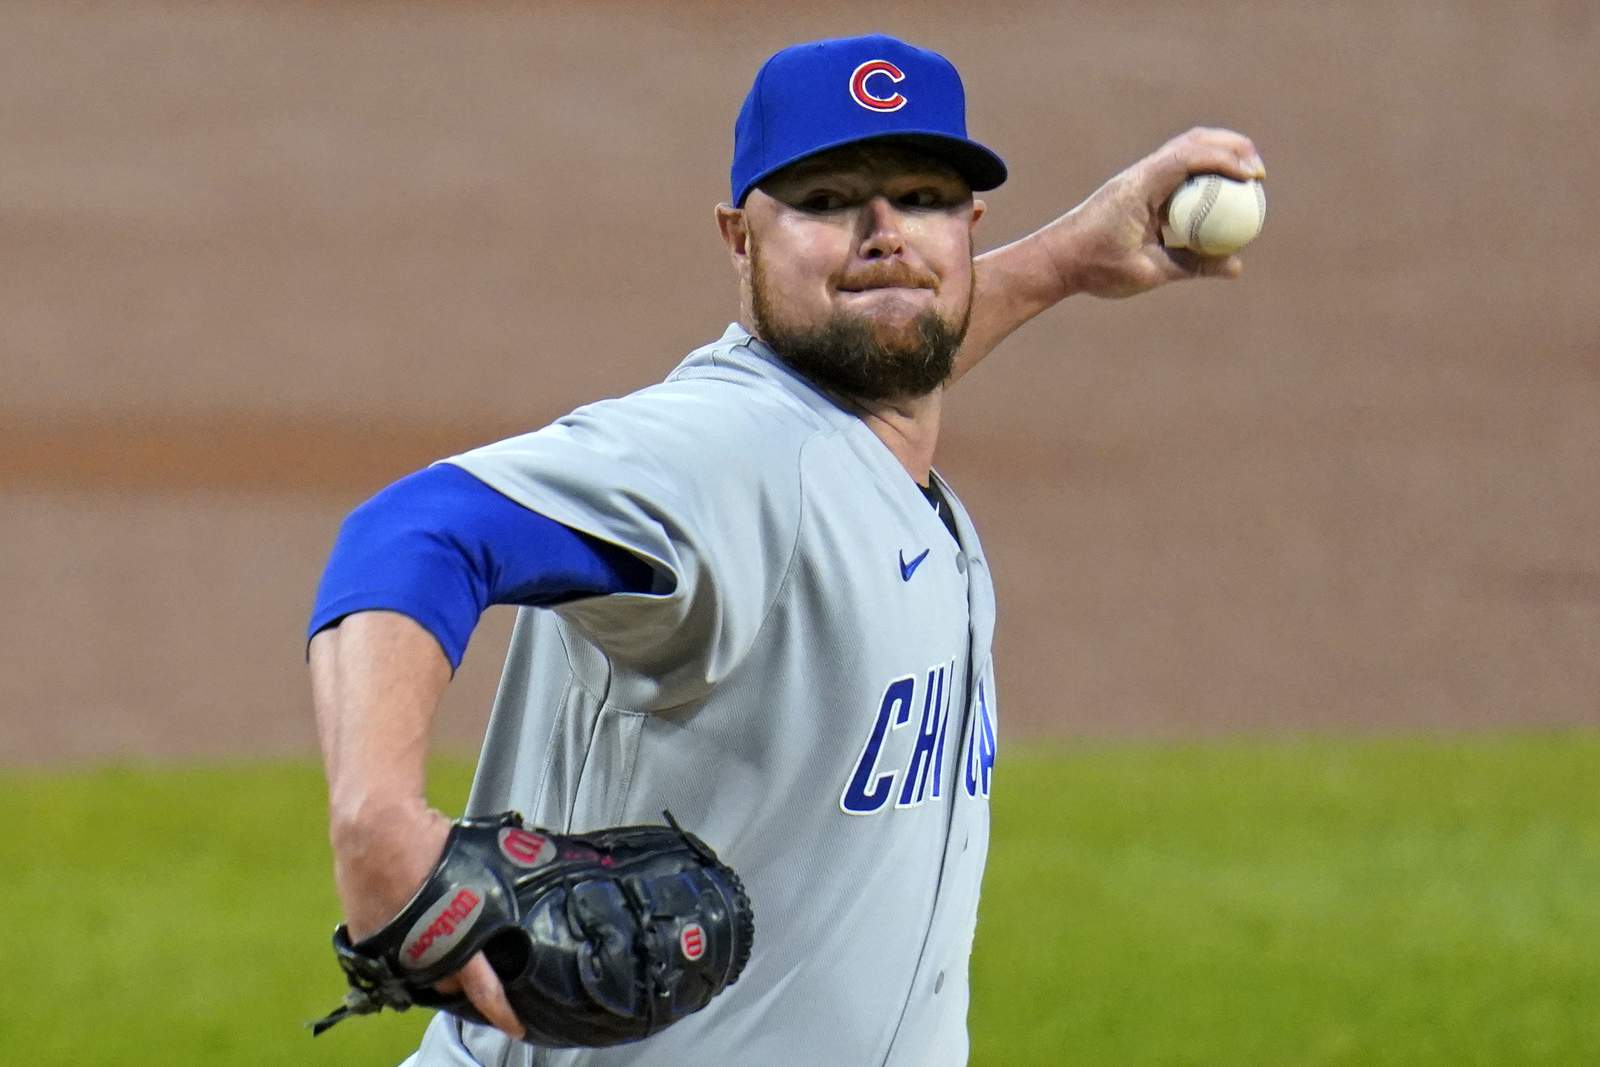 Jon Lester option declined by Cubs, lefty becomes free agent